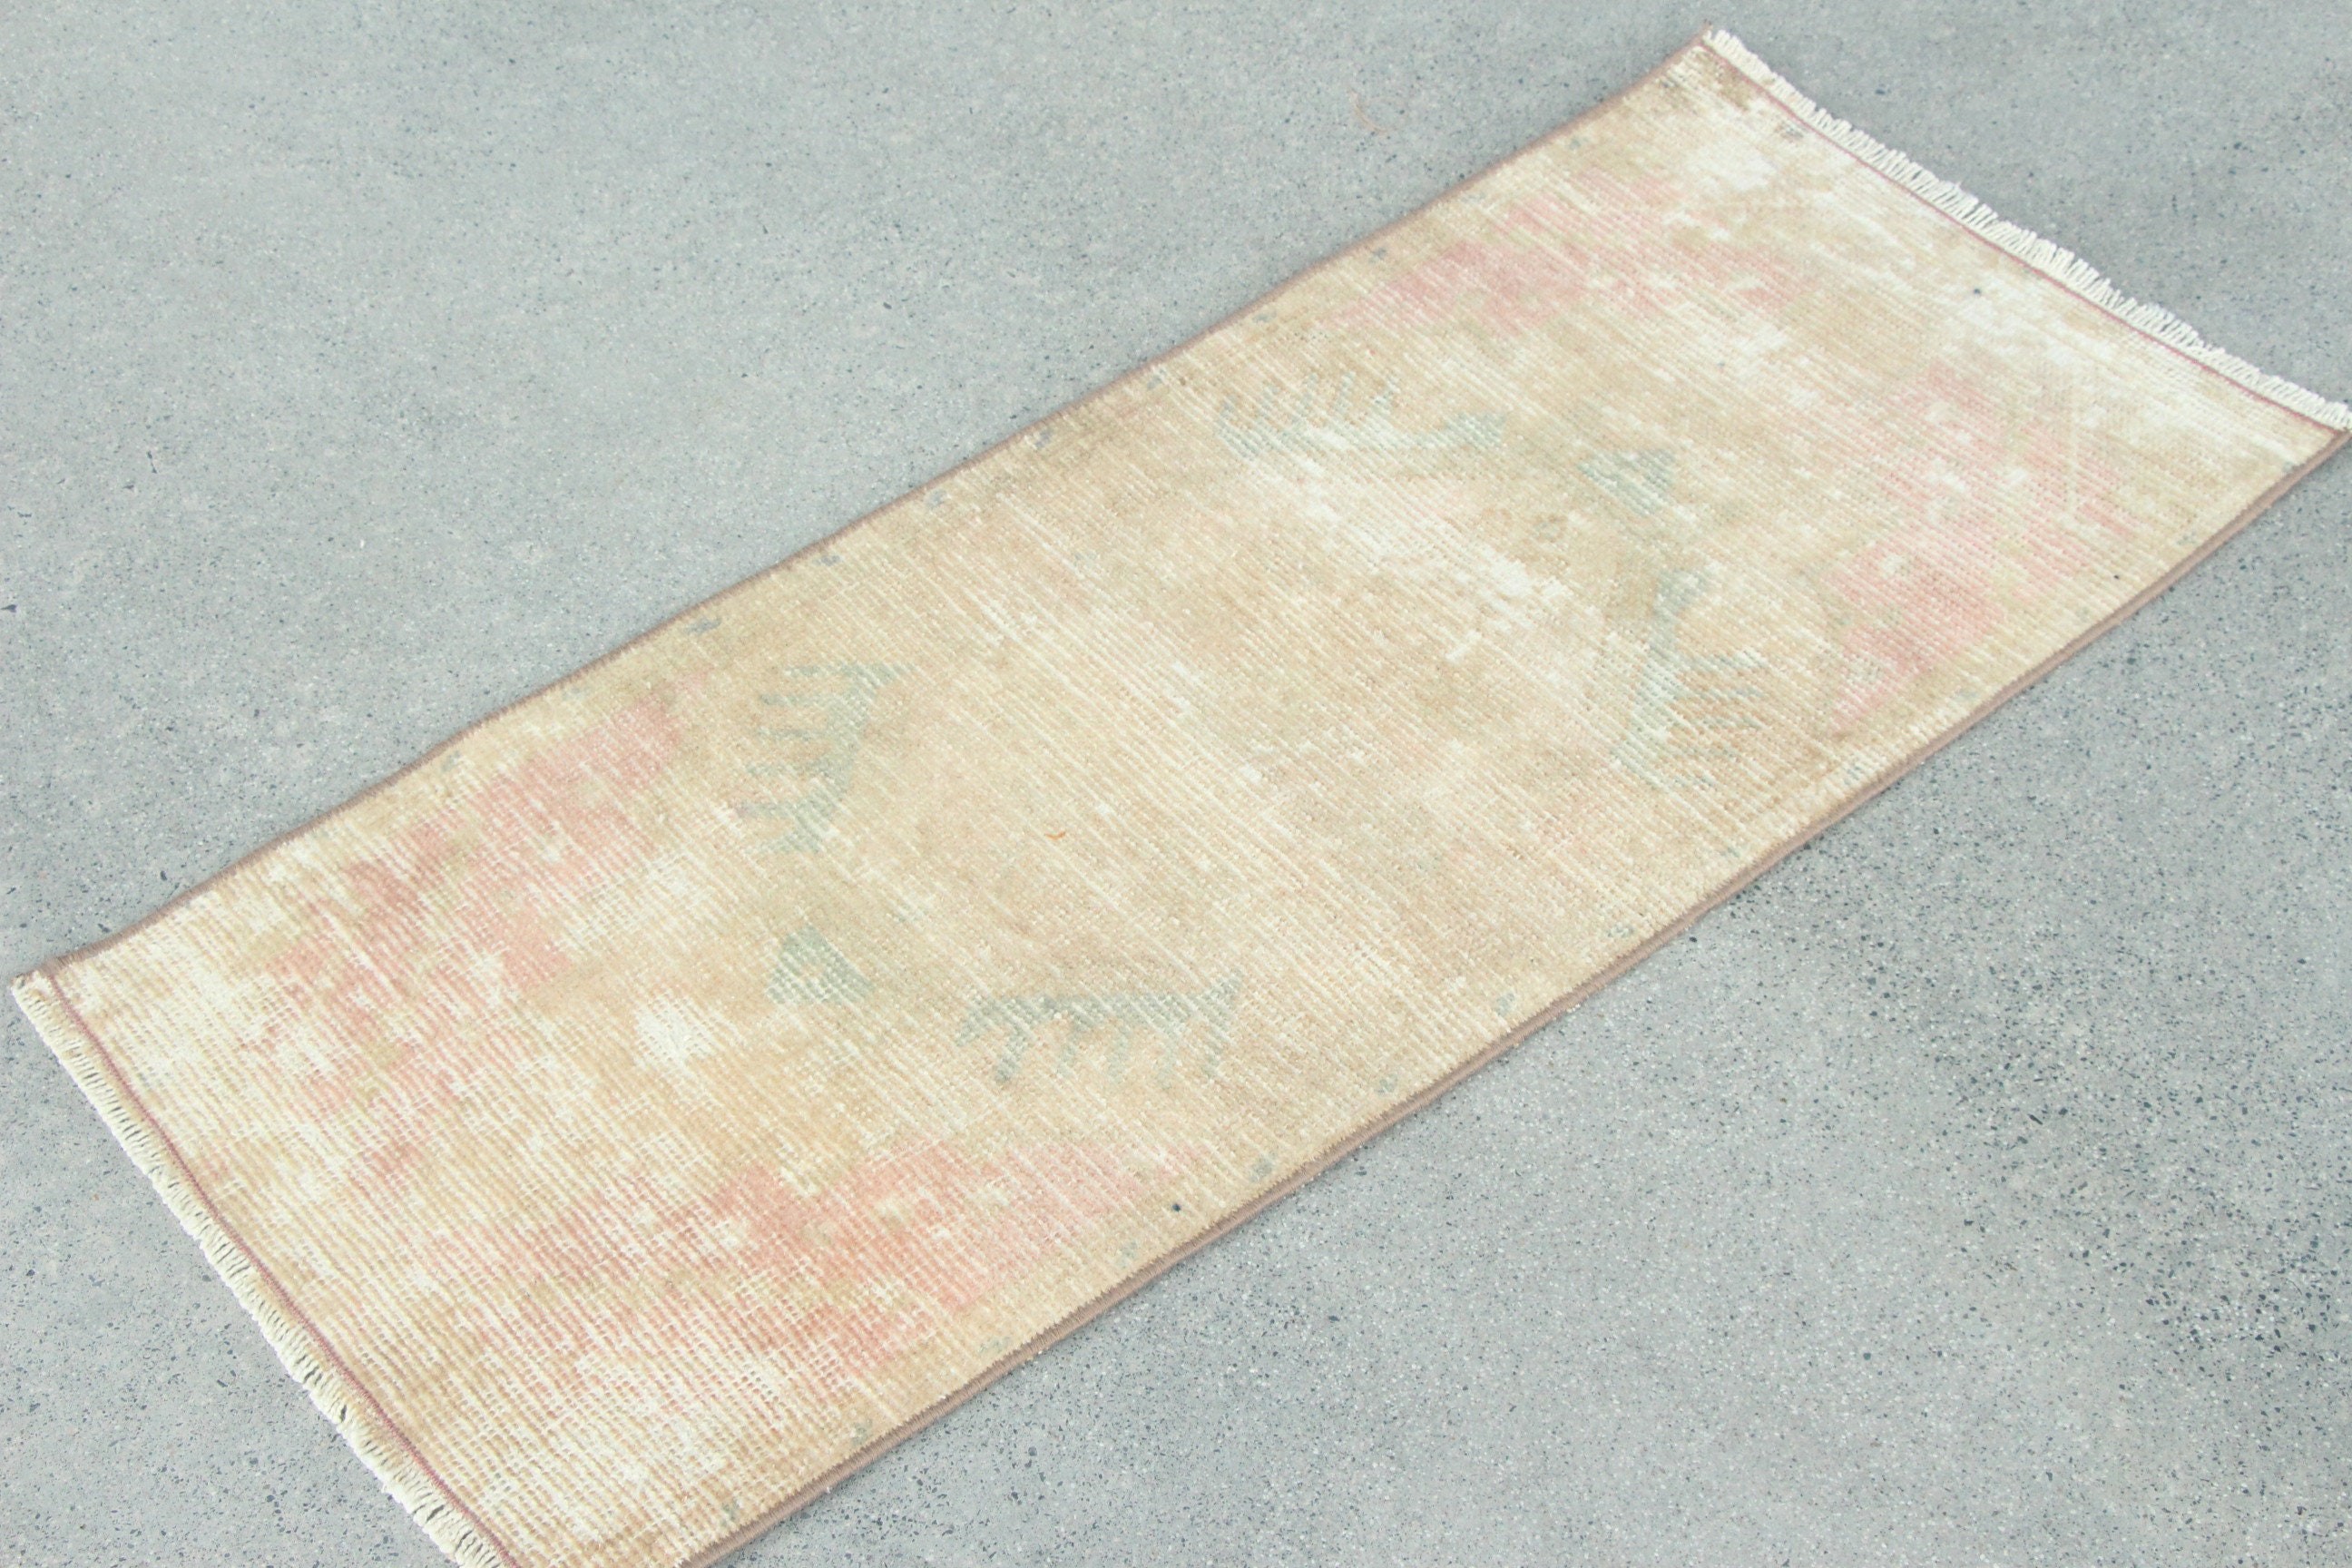 Door Mat Rug, White Moroccan Rugs, Kitchen Rug, Natural Rug, 1.4x3.3 ft Small Rug, Turkish Rug, Car Mat Rug, Vintage Rugs, Antique Rugs